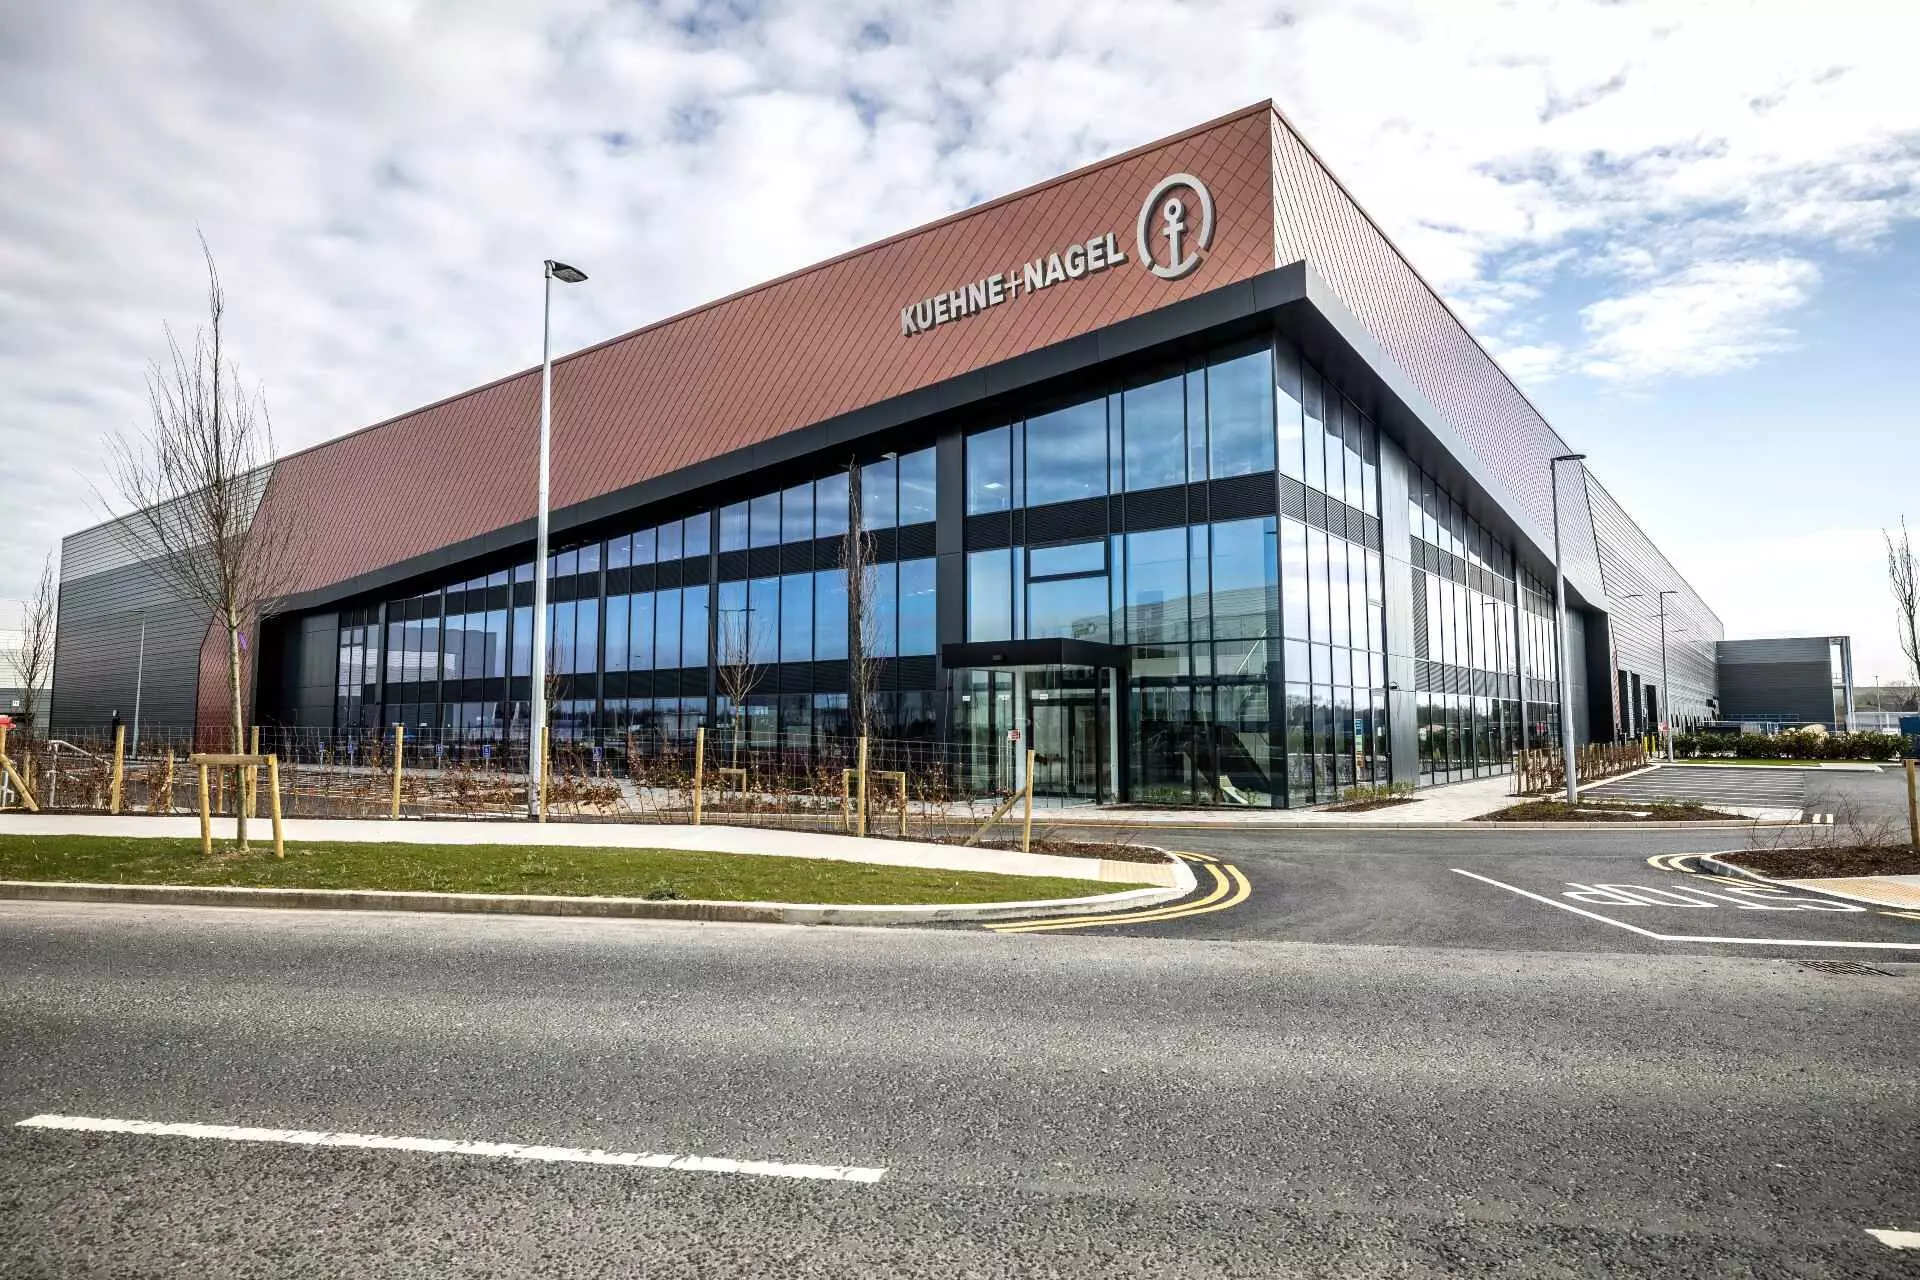 Kuehne+Nagel opens fourth warehouse for the healthcare sector in Ireland